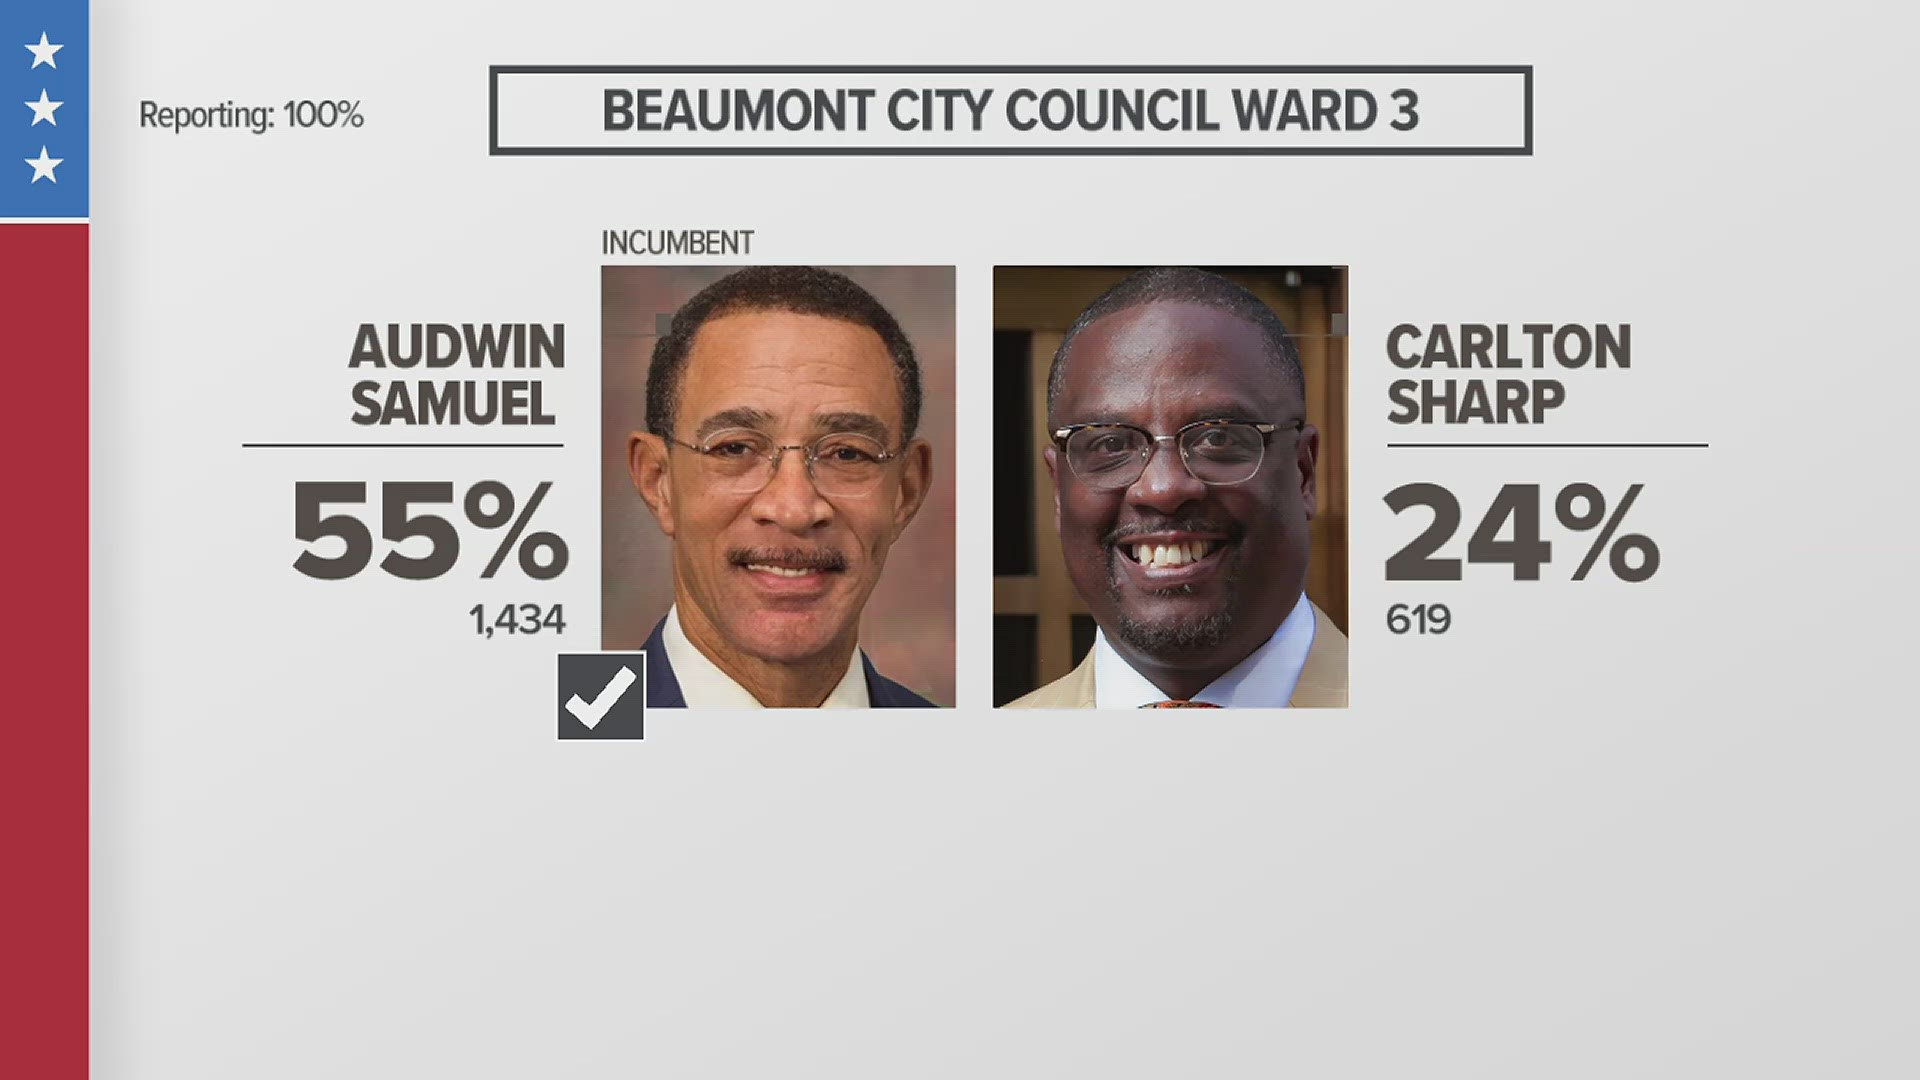 Samuel beat Dr. Carlton Sharp and Geary Senigaur Jr. with 55% of the vote or 1,434 votes.